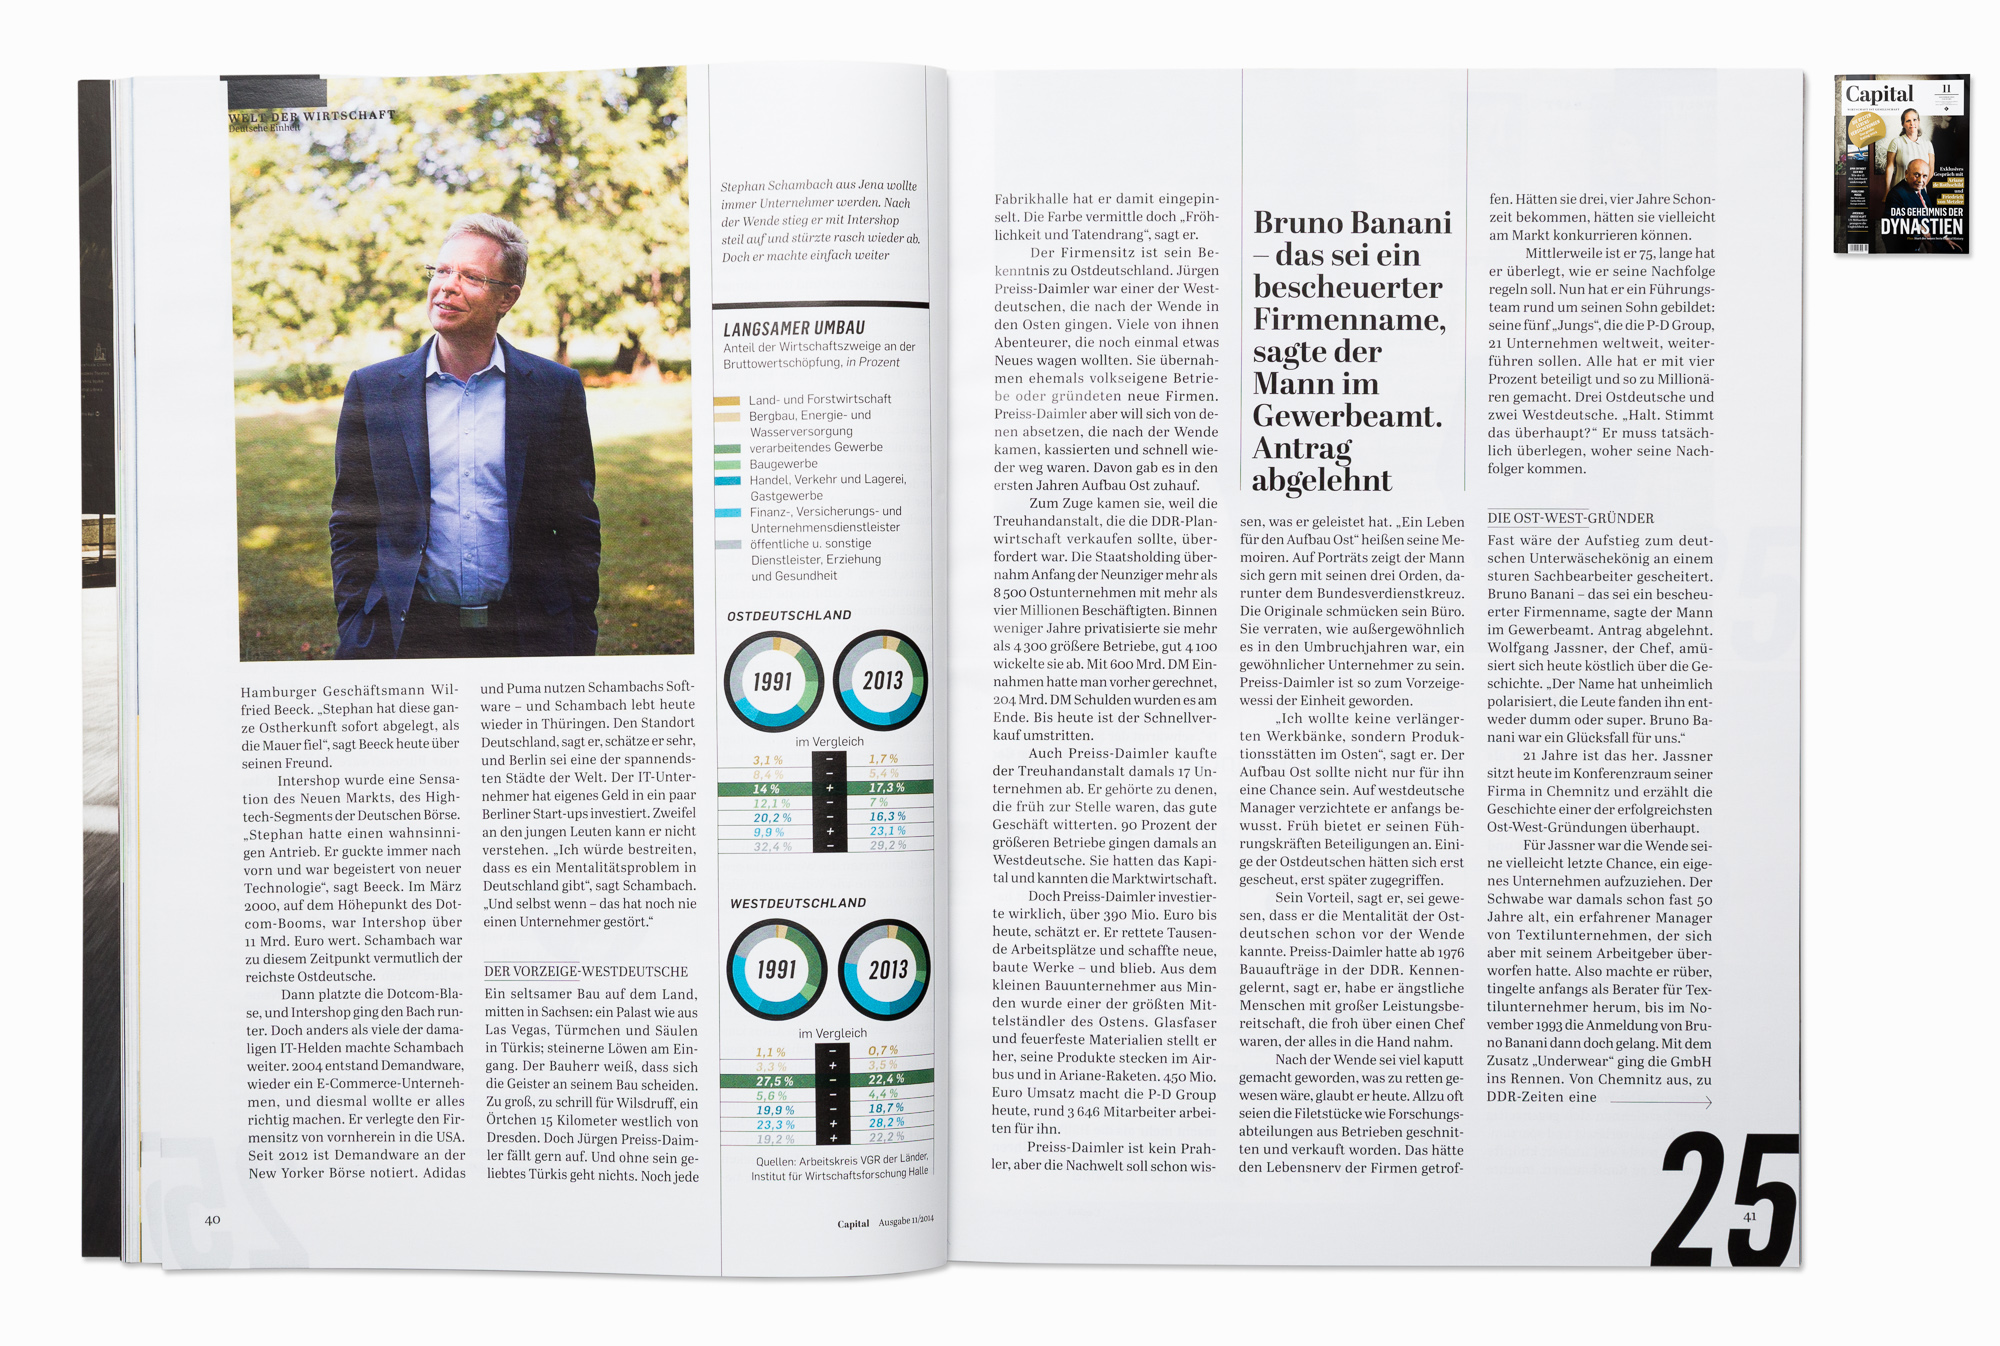   Stephan Schambach, founder of Intershop and Demandware, for Capital magazine, Berlin 2014  